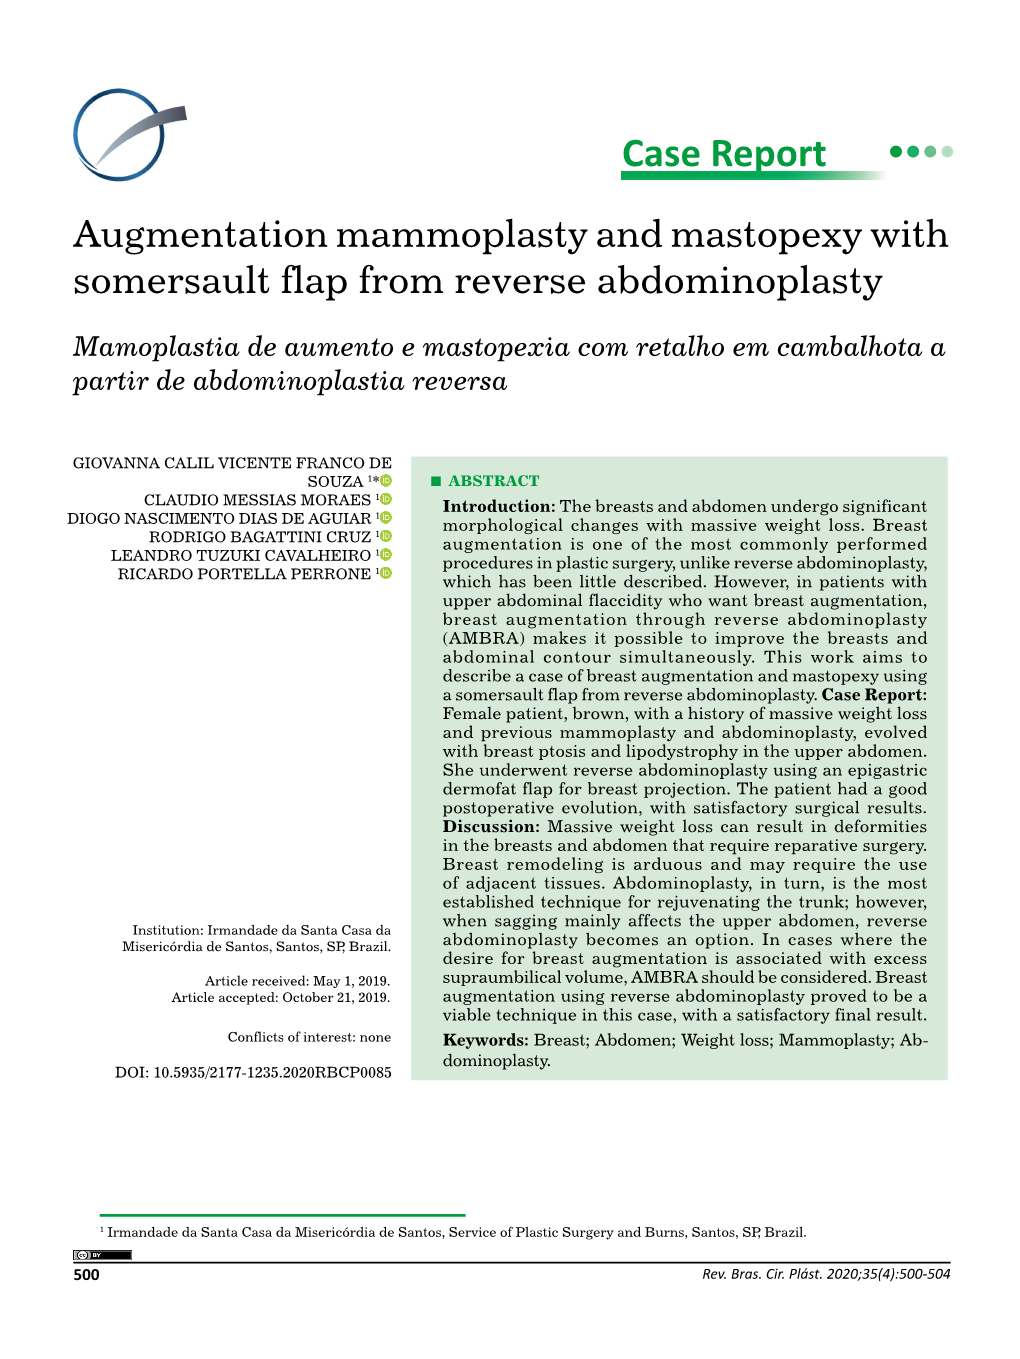 Case Report Augmentation Mammoplasty and Mastopexy with Somersault Flap from Reverse Abdominoplasty